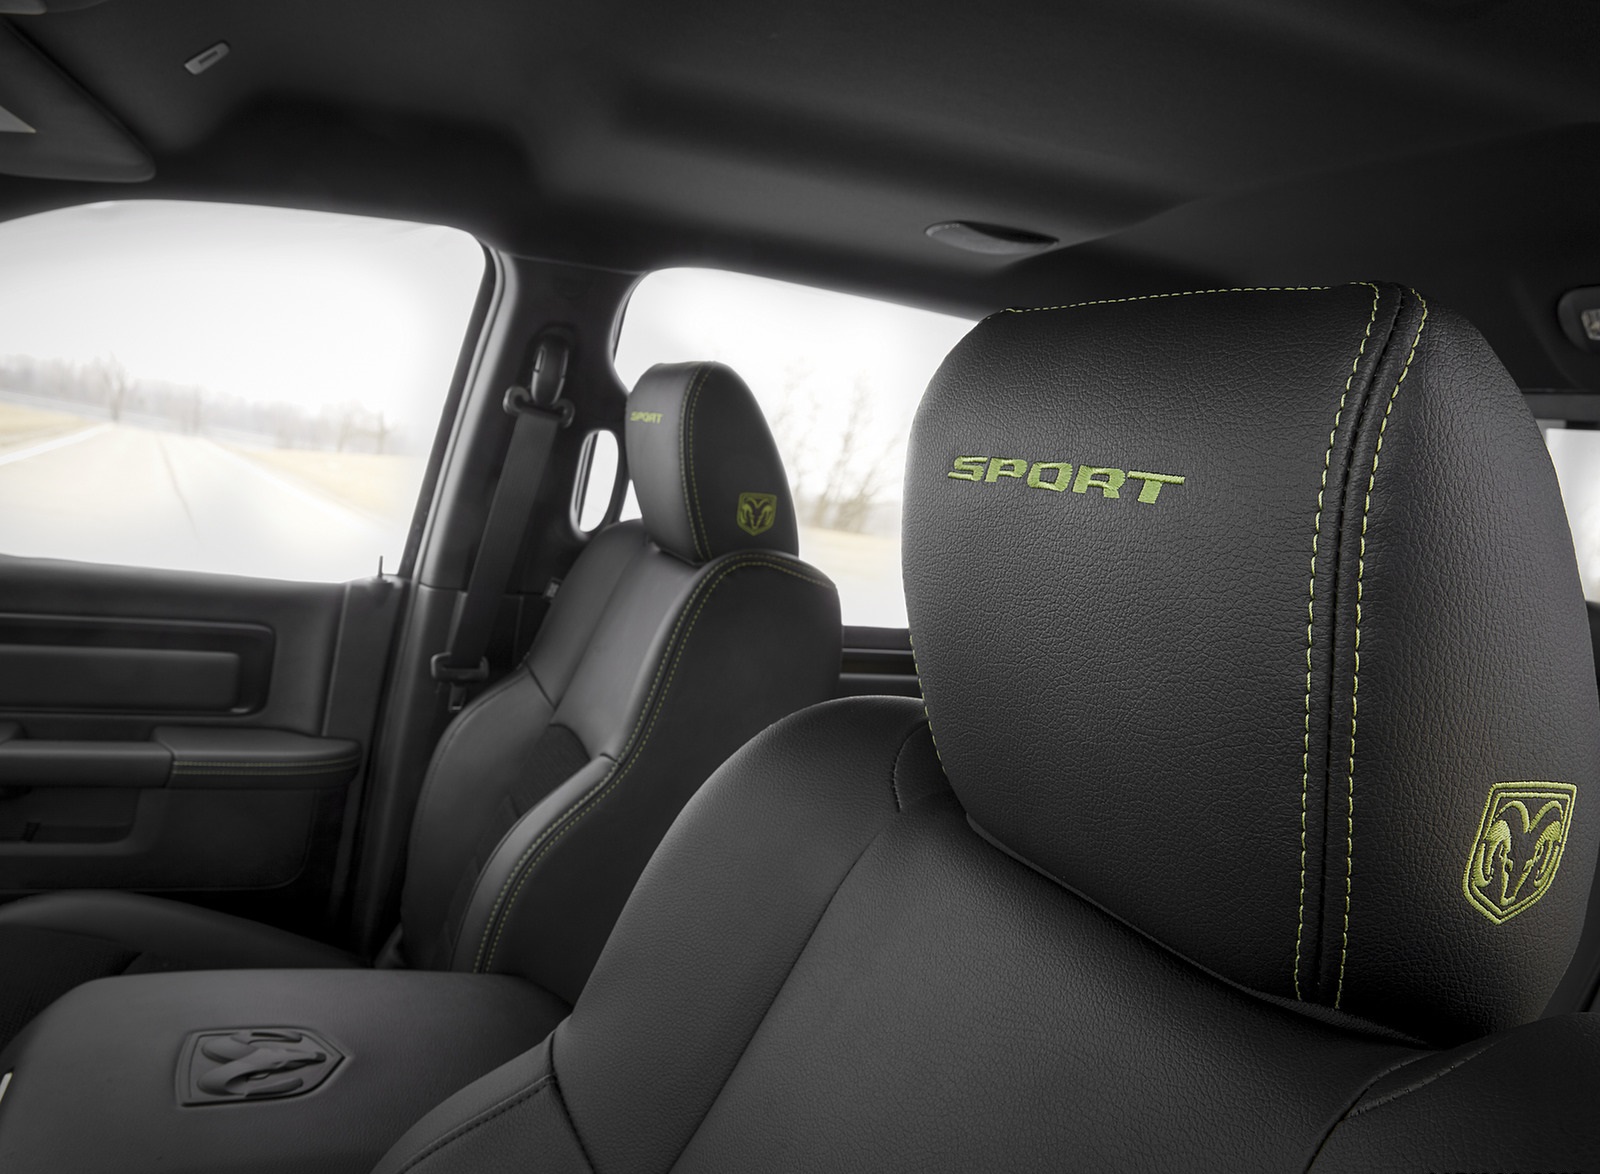 2017 Ram 1500 Sublime Sport Interior Seats Wallpapers #12 of 12